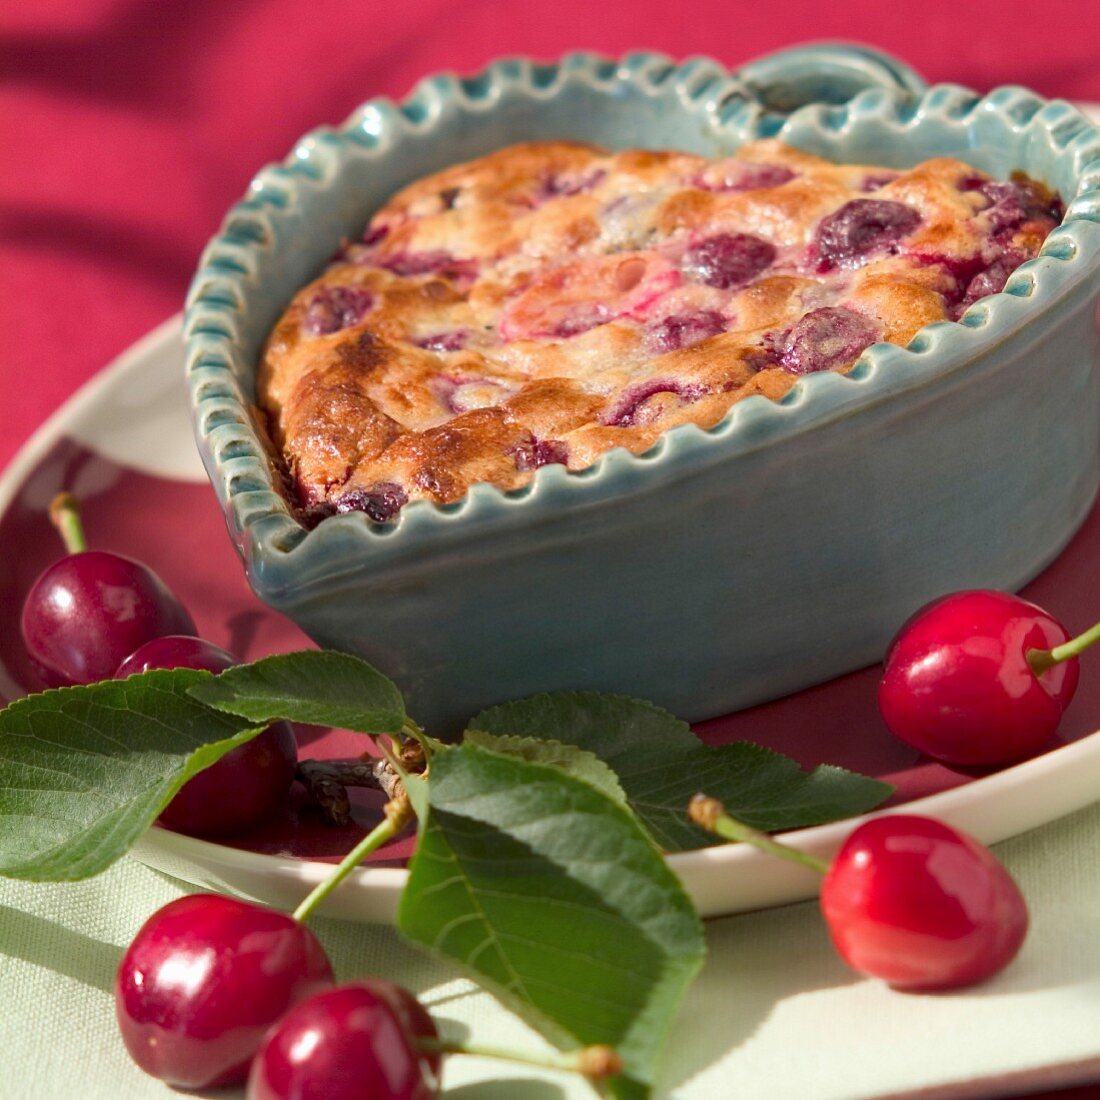 Cherry clafoutis batter pudding (topic: Provence)